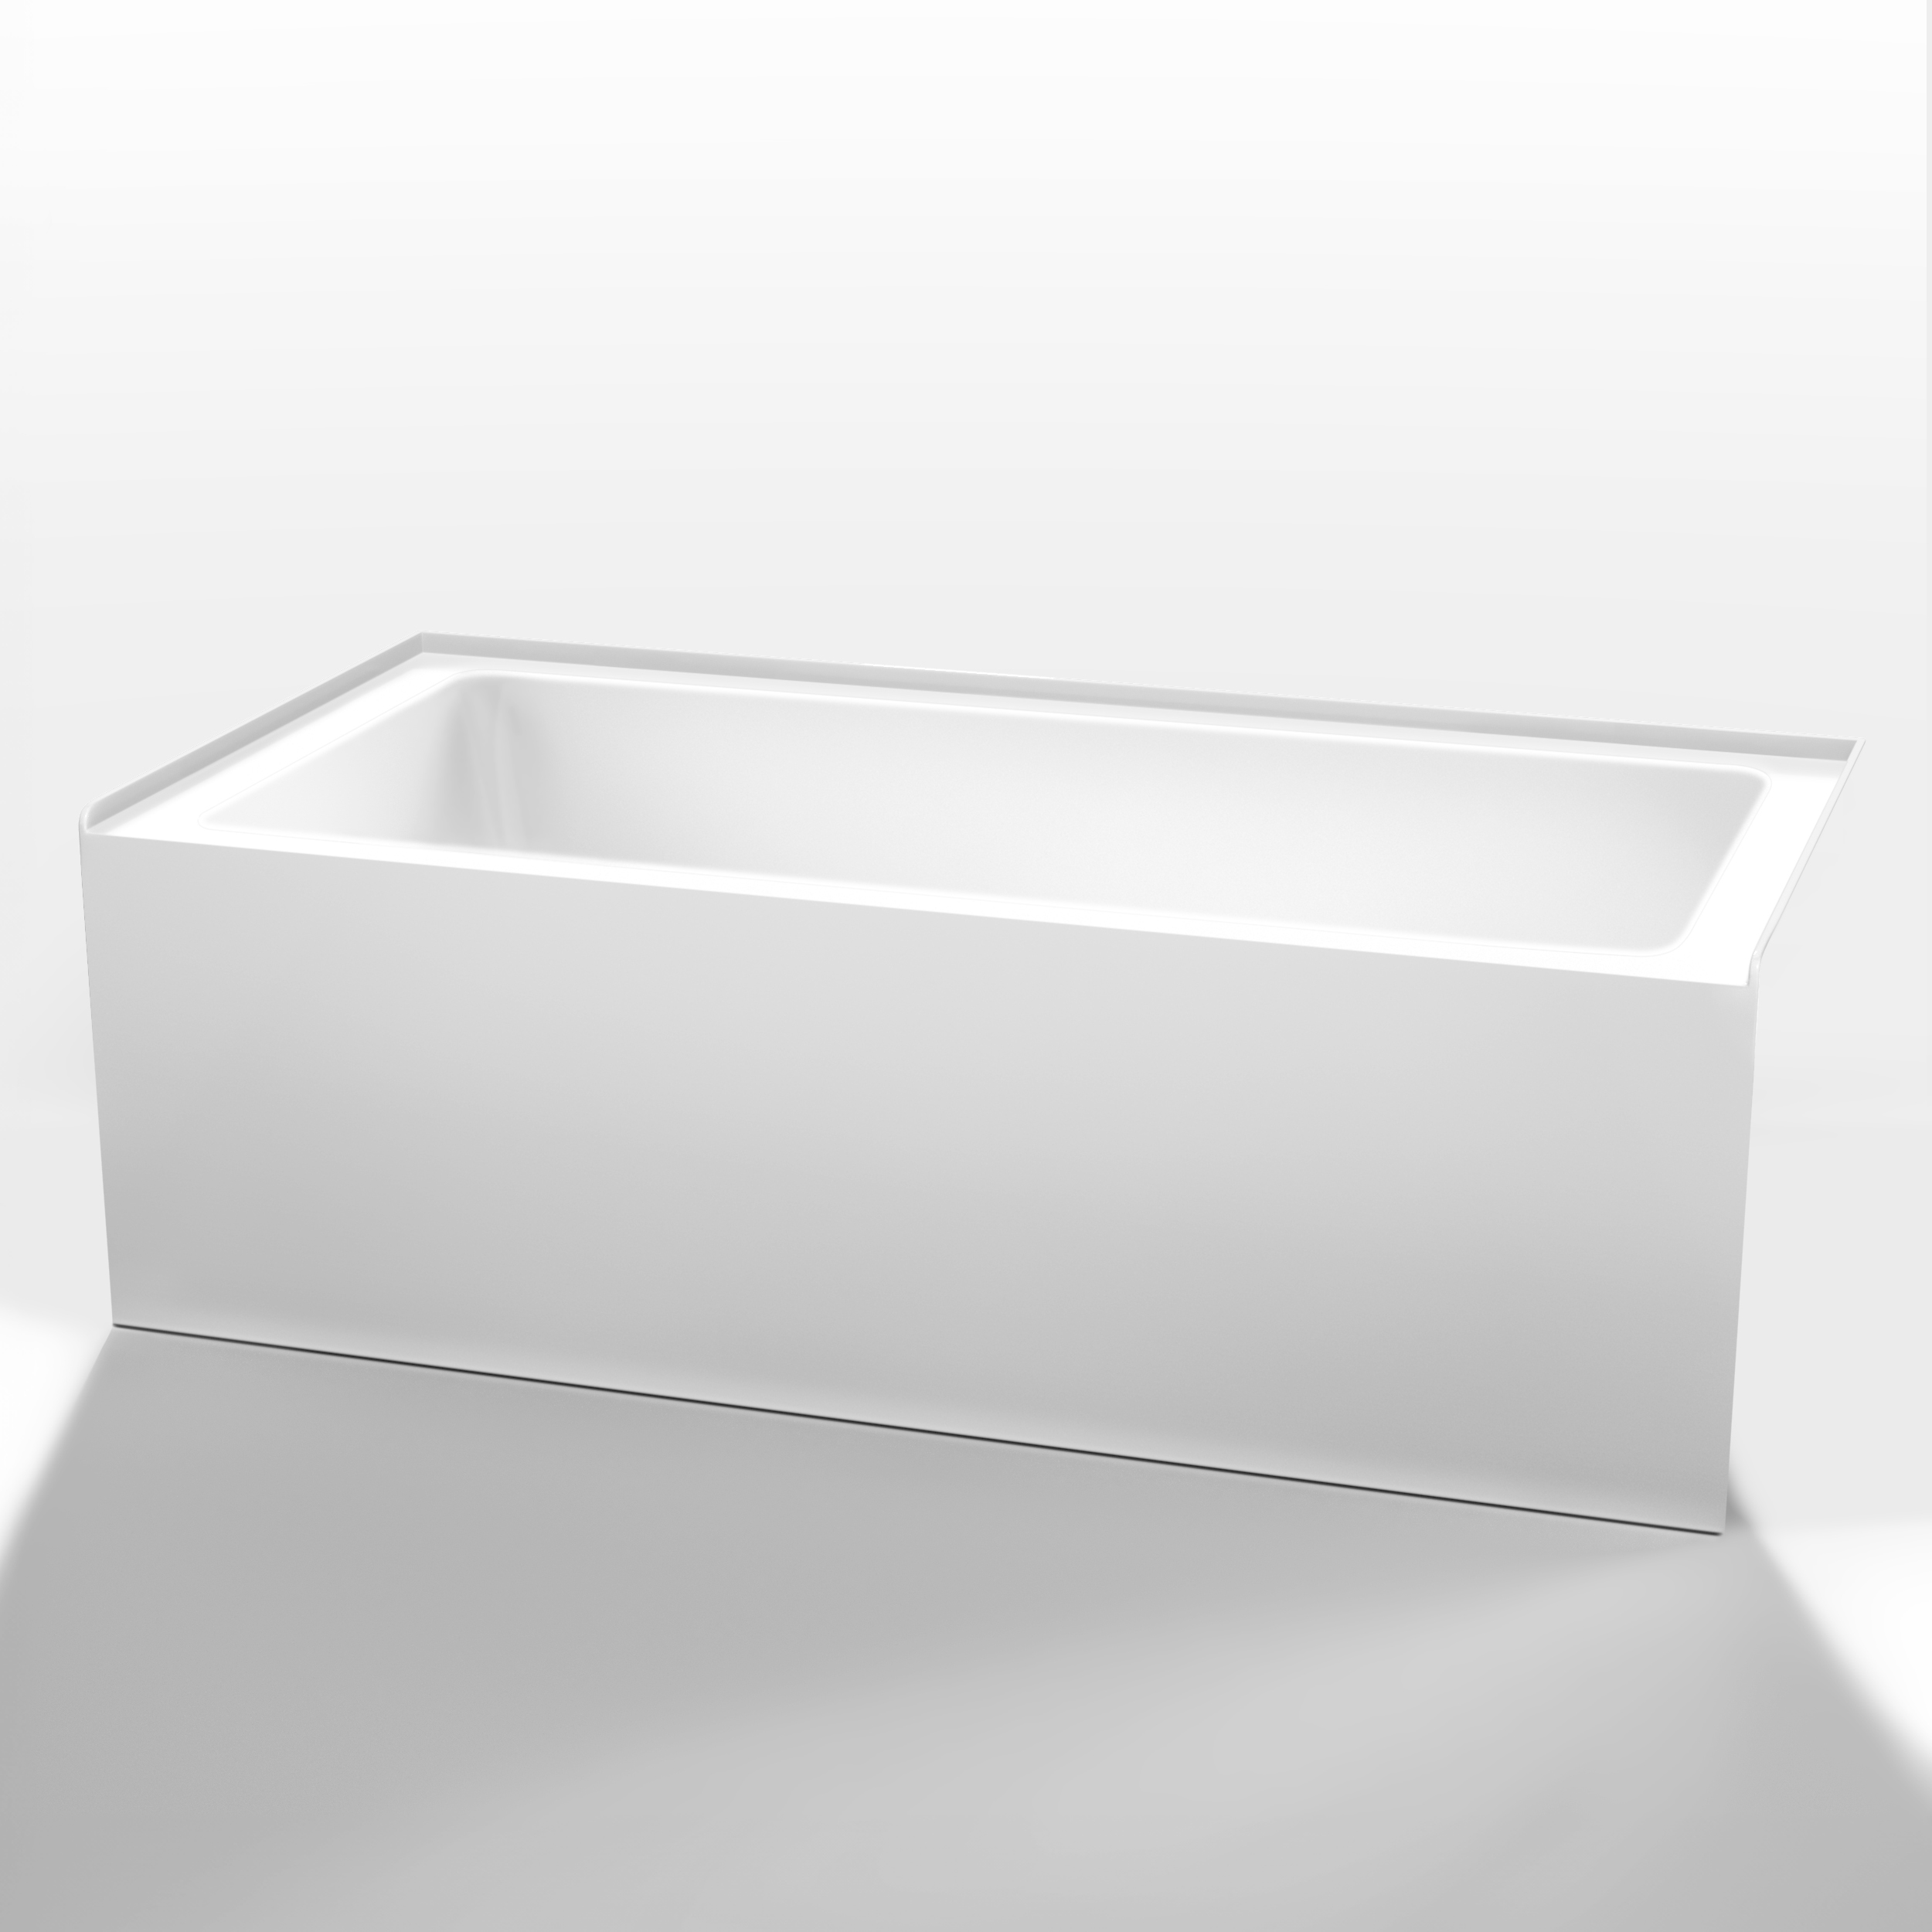 Grayley Alcove 66" Bathtub, Right Side Drain by Wyndham Collection - White WC-BTE-6632R